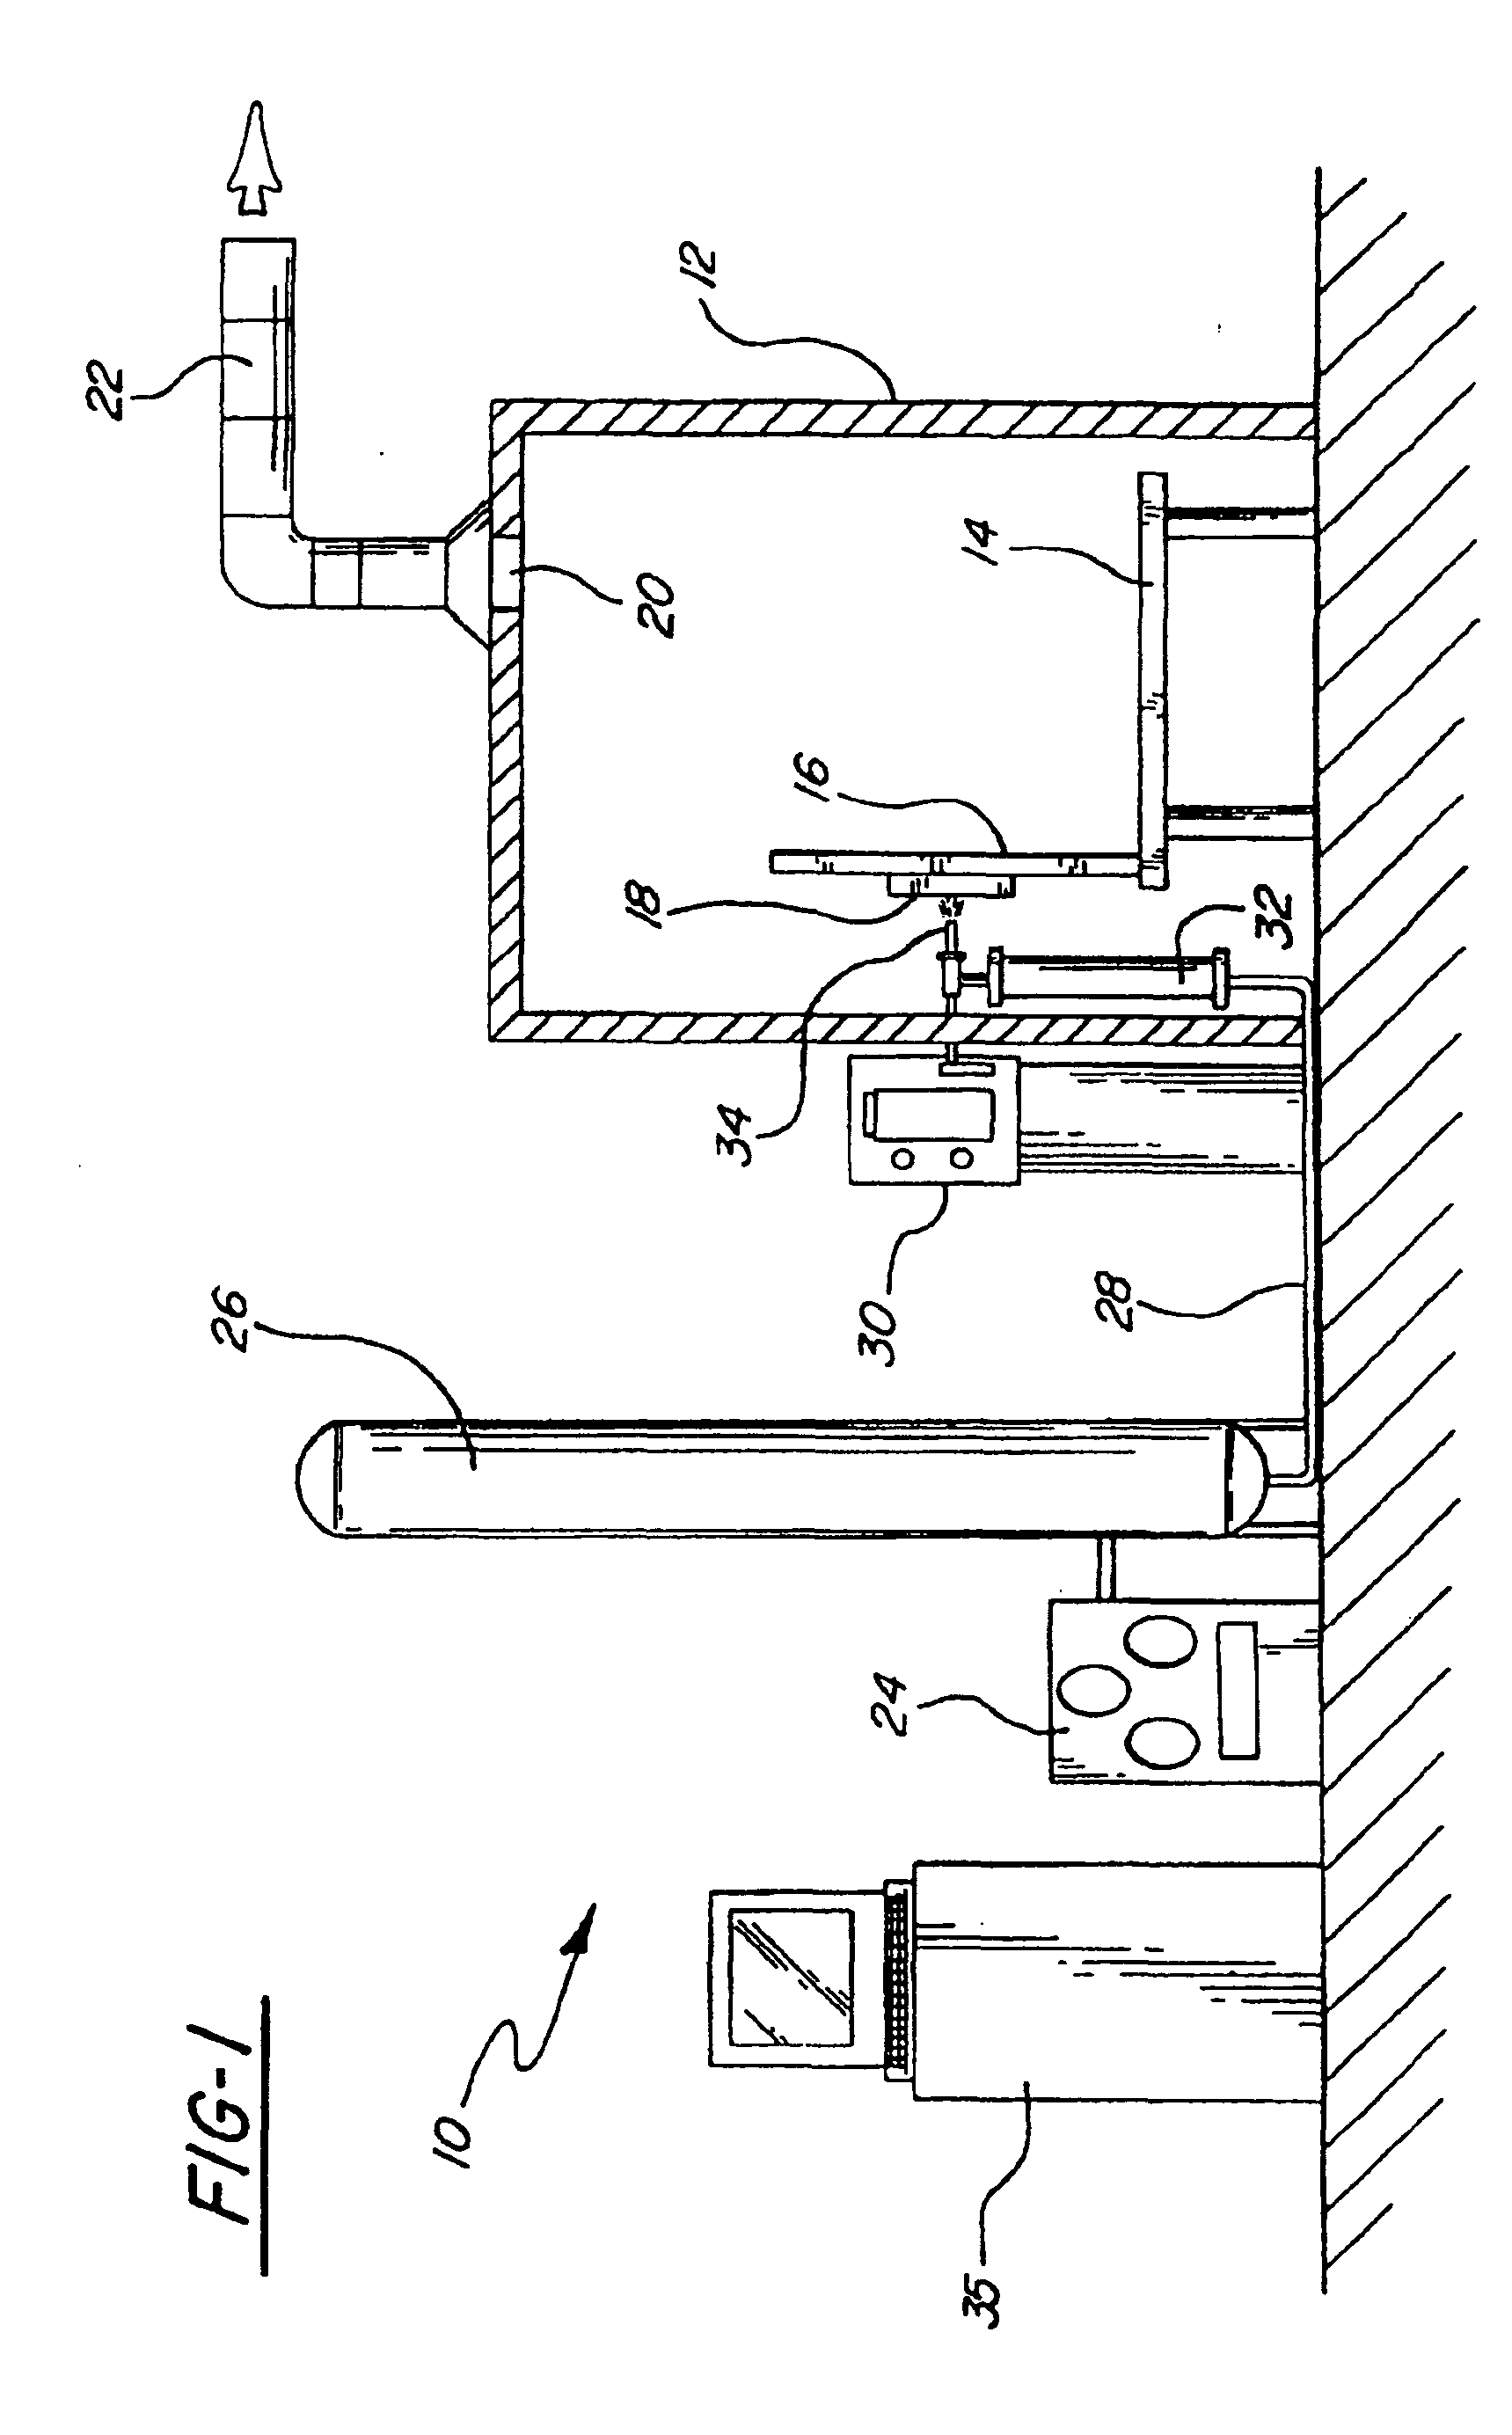 Coaxial low pressure injection method and a gas collimator for a kinetic spray nozzle